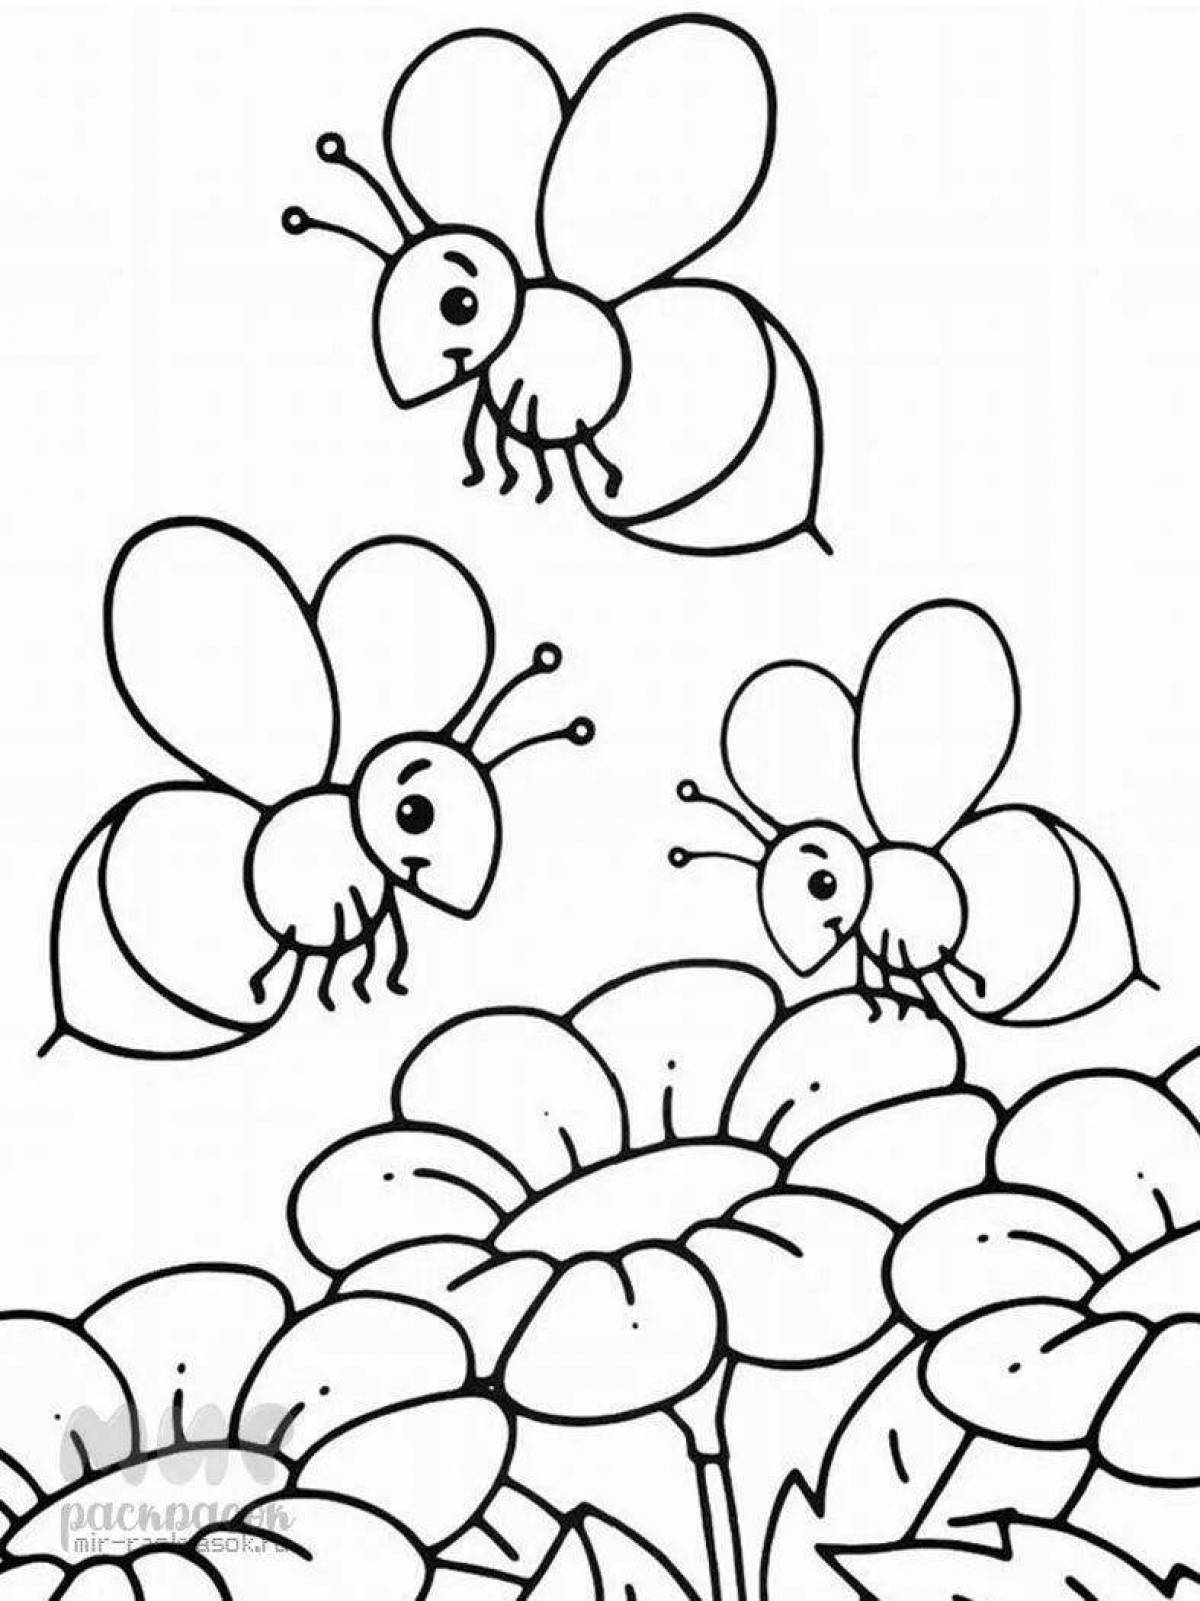 Insects for children 3 4 years old #15